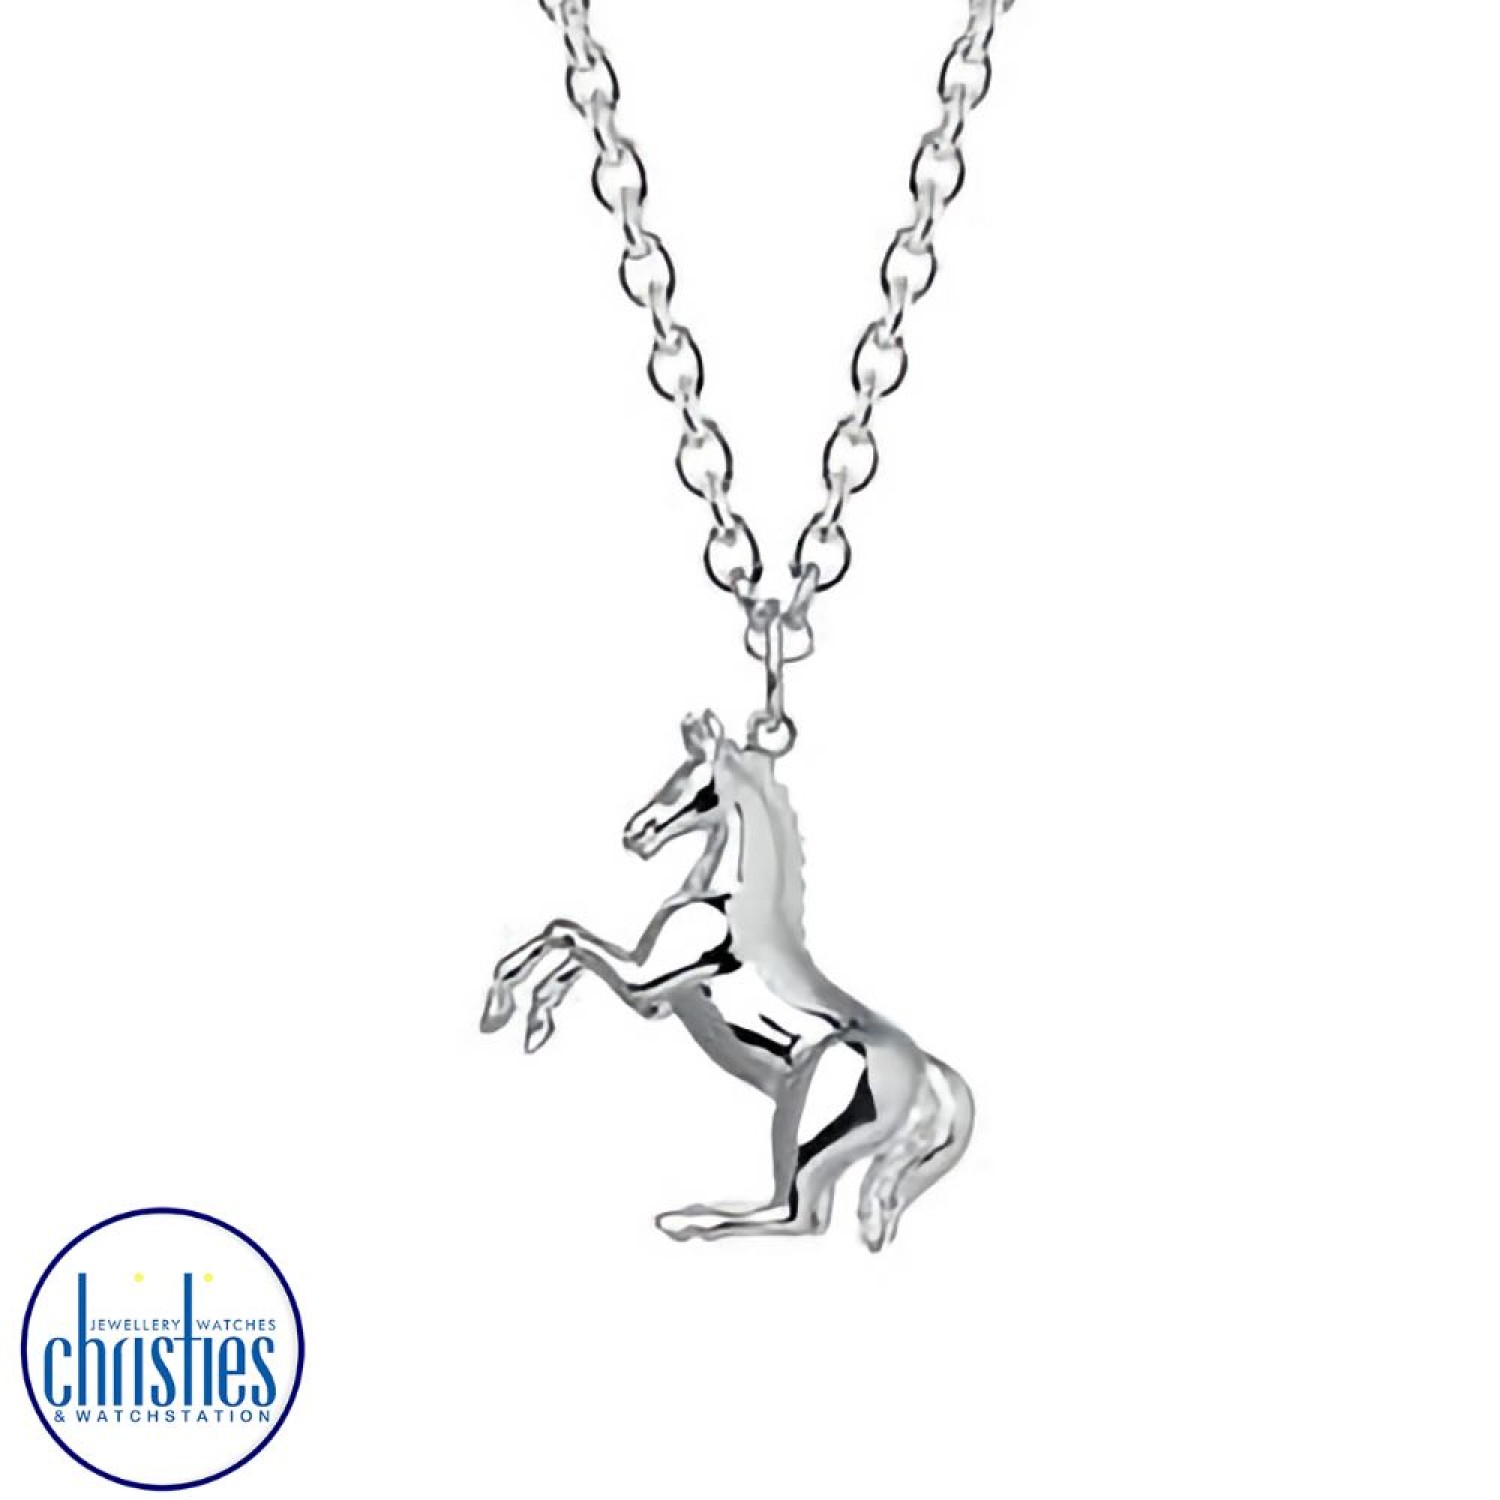 Equestrian Jewellery Silver Horse Necklace. Horses are intelligent and instinctive creatures, highly valued for their power, bravery and companionship throughout the ages. horseshoe jewellery nz